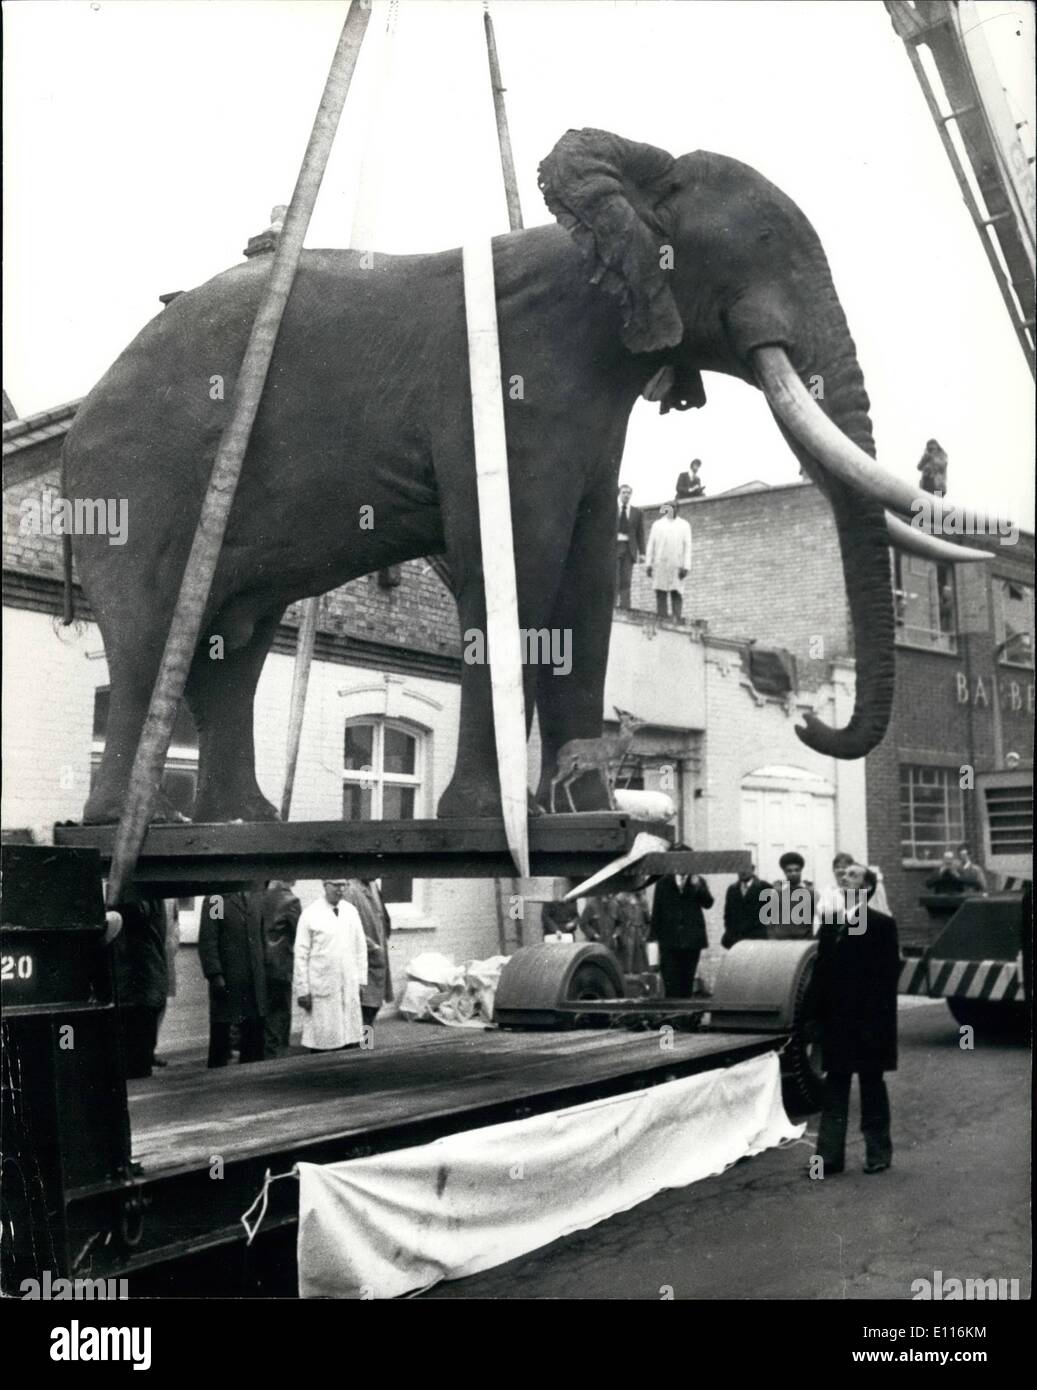 Feb. 20, 1976 - February 20th 1976 Taxidermist solves a jumbo sized problem. Taxidermist Rowland Ward of Crawley Road, Wood Green, London, knew they had a jumbo sized problem the day they received the hide of a 40 year old African bull elephant which had to be stuffed for the Royal Scottish Museum in Edinburgh. Now, eight months later, the re-assembled elephant, weighing one and a half tons, and measures 12 feet to the shoulder, had to be winched up by crane through the roof of Rowland Ward's workshop, which had to be removed for the occasion Stock Photo